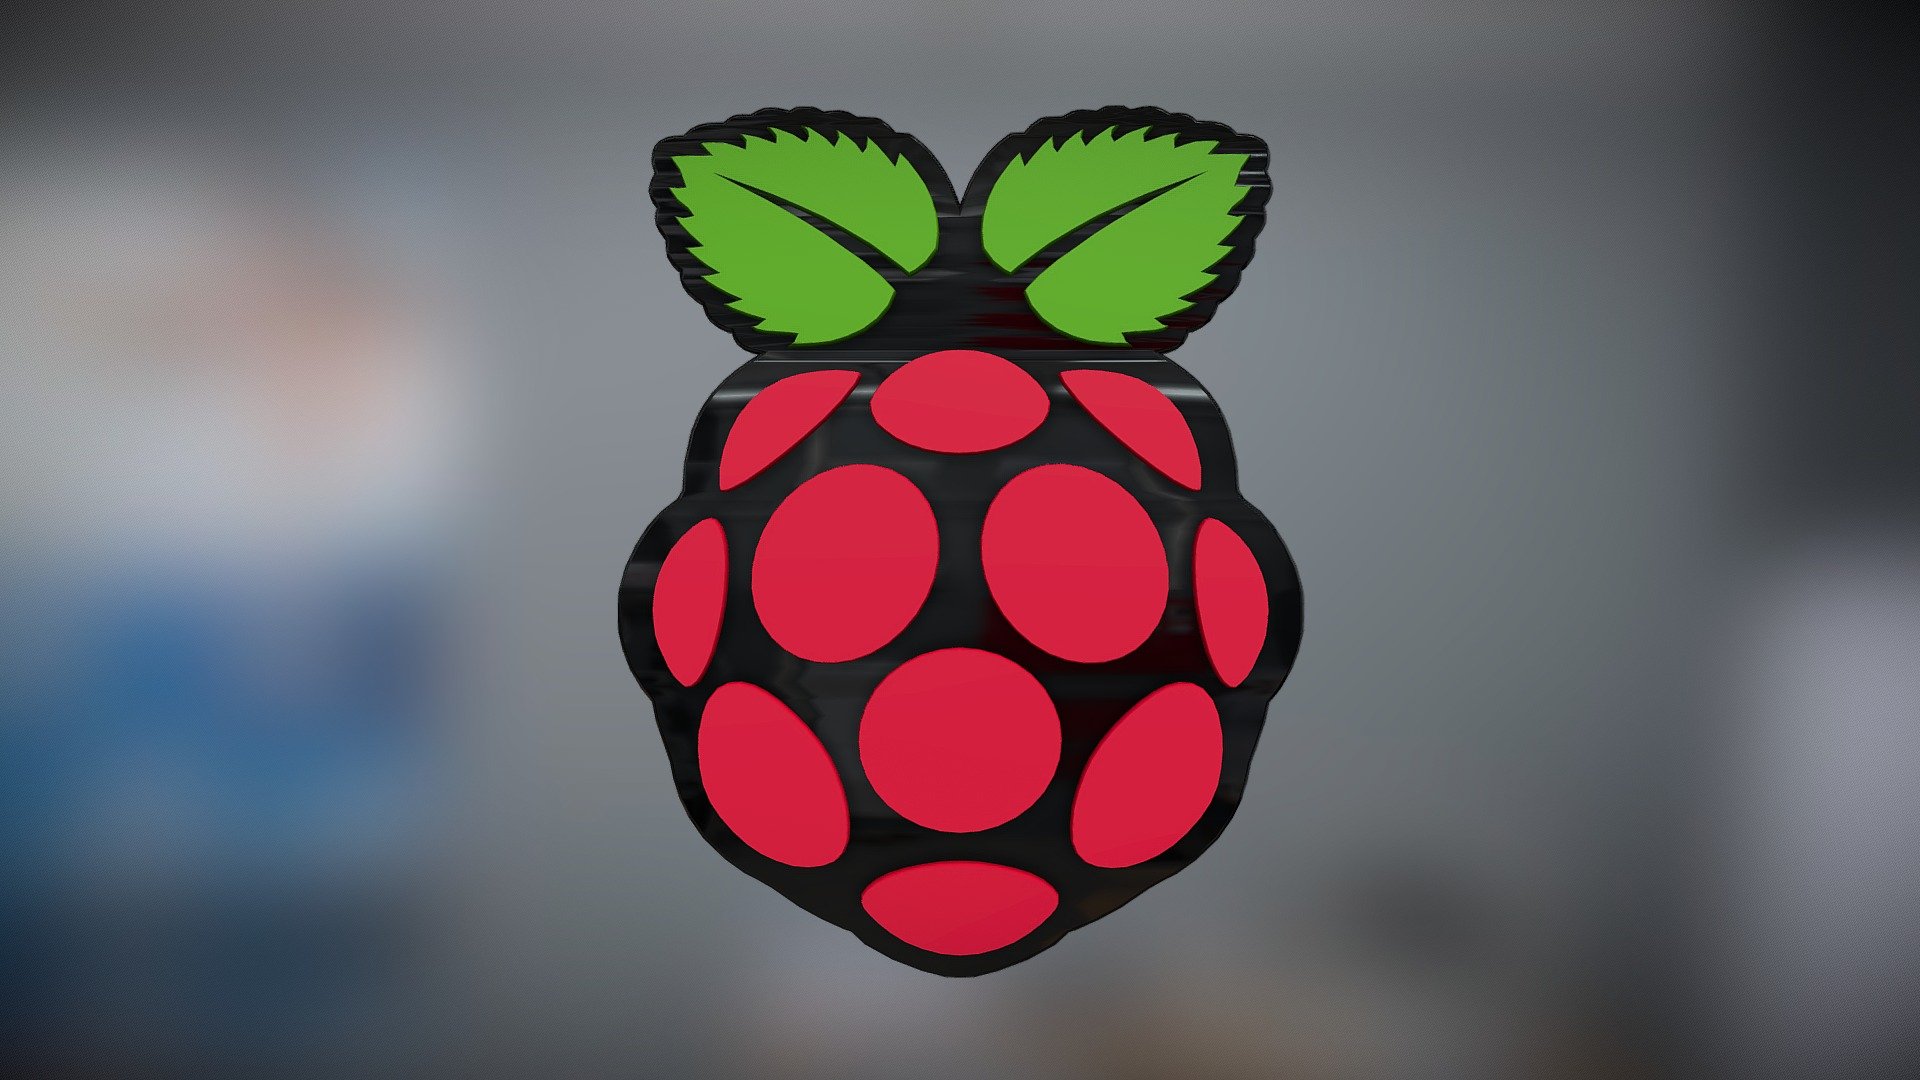 The Raspberry Pi logo made 3D




has FBX file with textures embedded

has OBJ and MTL files with textures folder

textures are Golssy Plastic Black and Matte Plastic Dark Pink and Green
 - Raspberry Pi 3D Logo - 3D model by Unavailable (@UnavailableA) 3d model